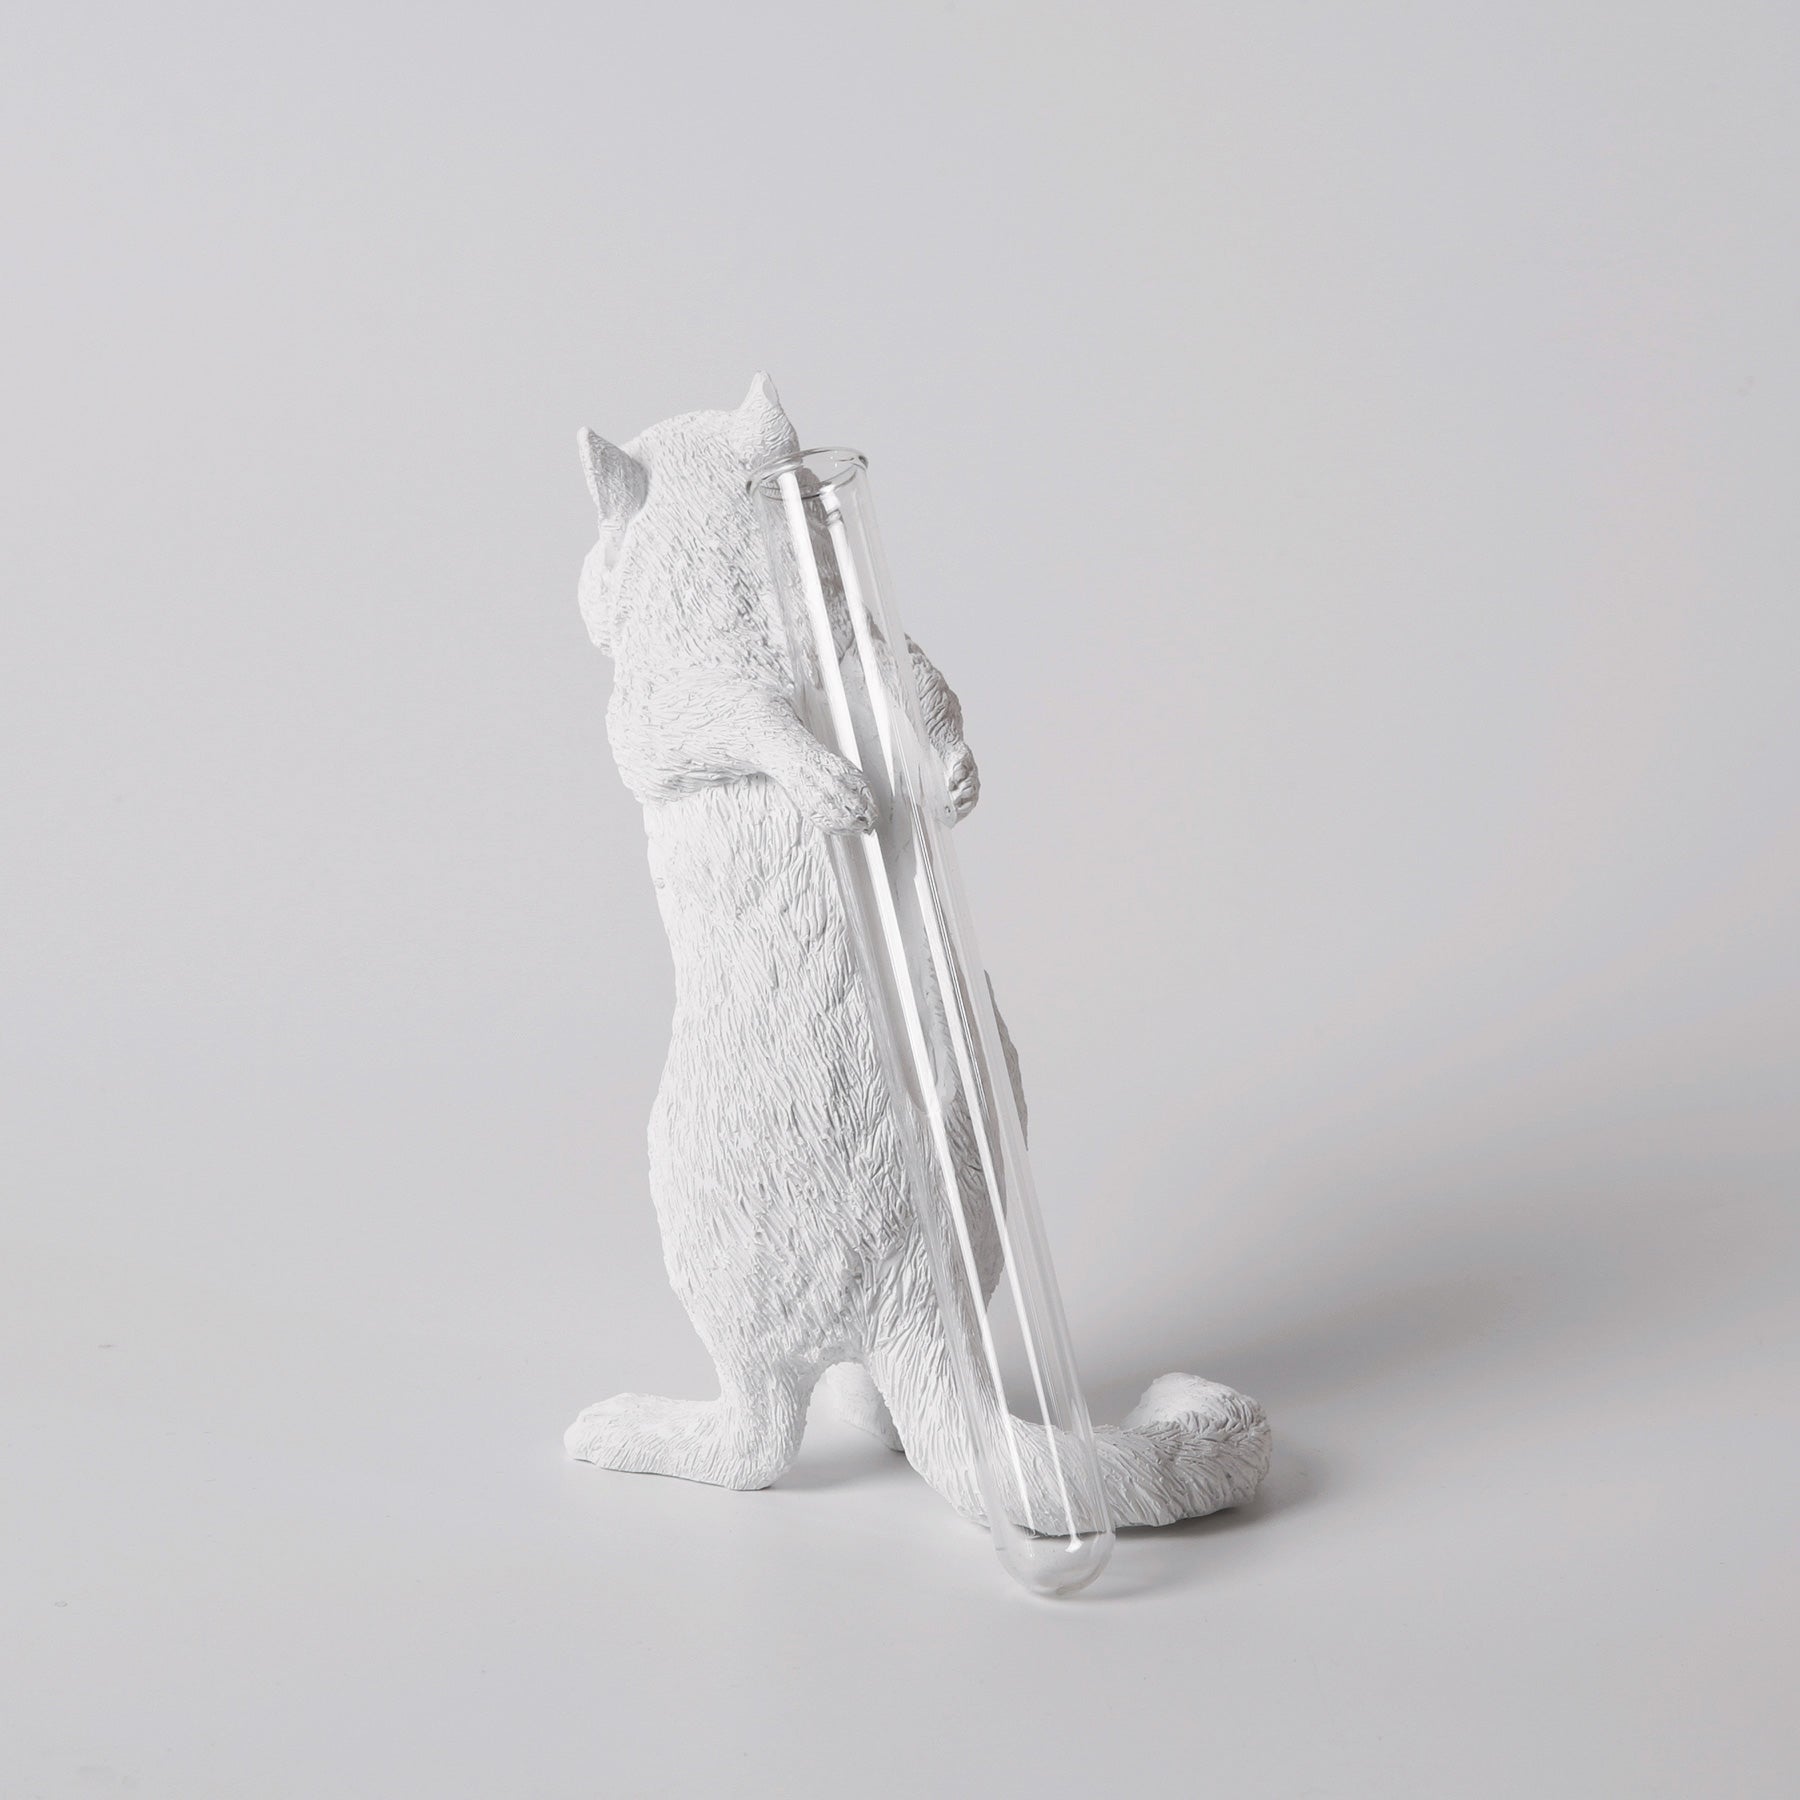 White Vase Series to Flowers and Diffuser Reeds with Squirrel Statue